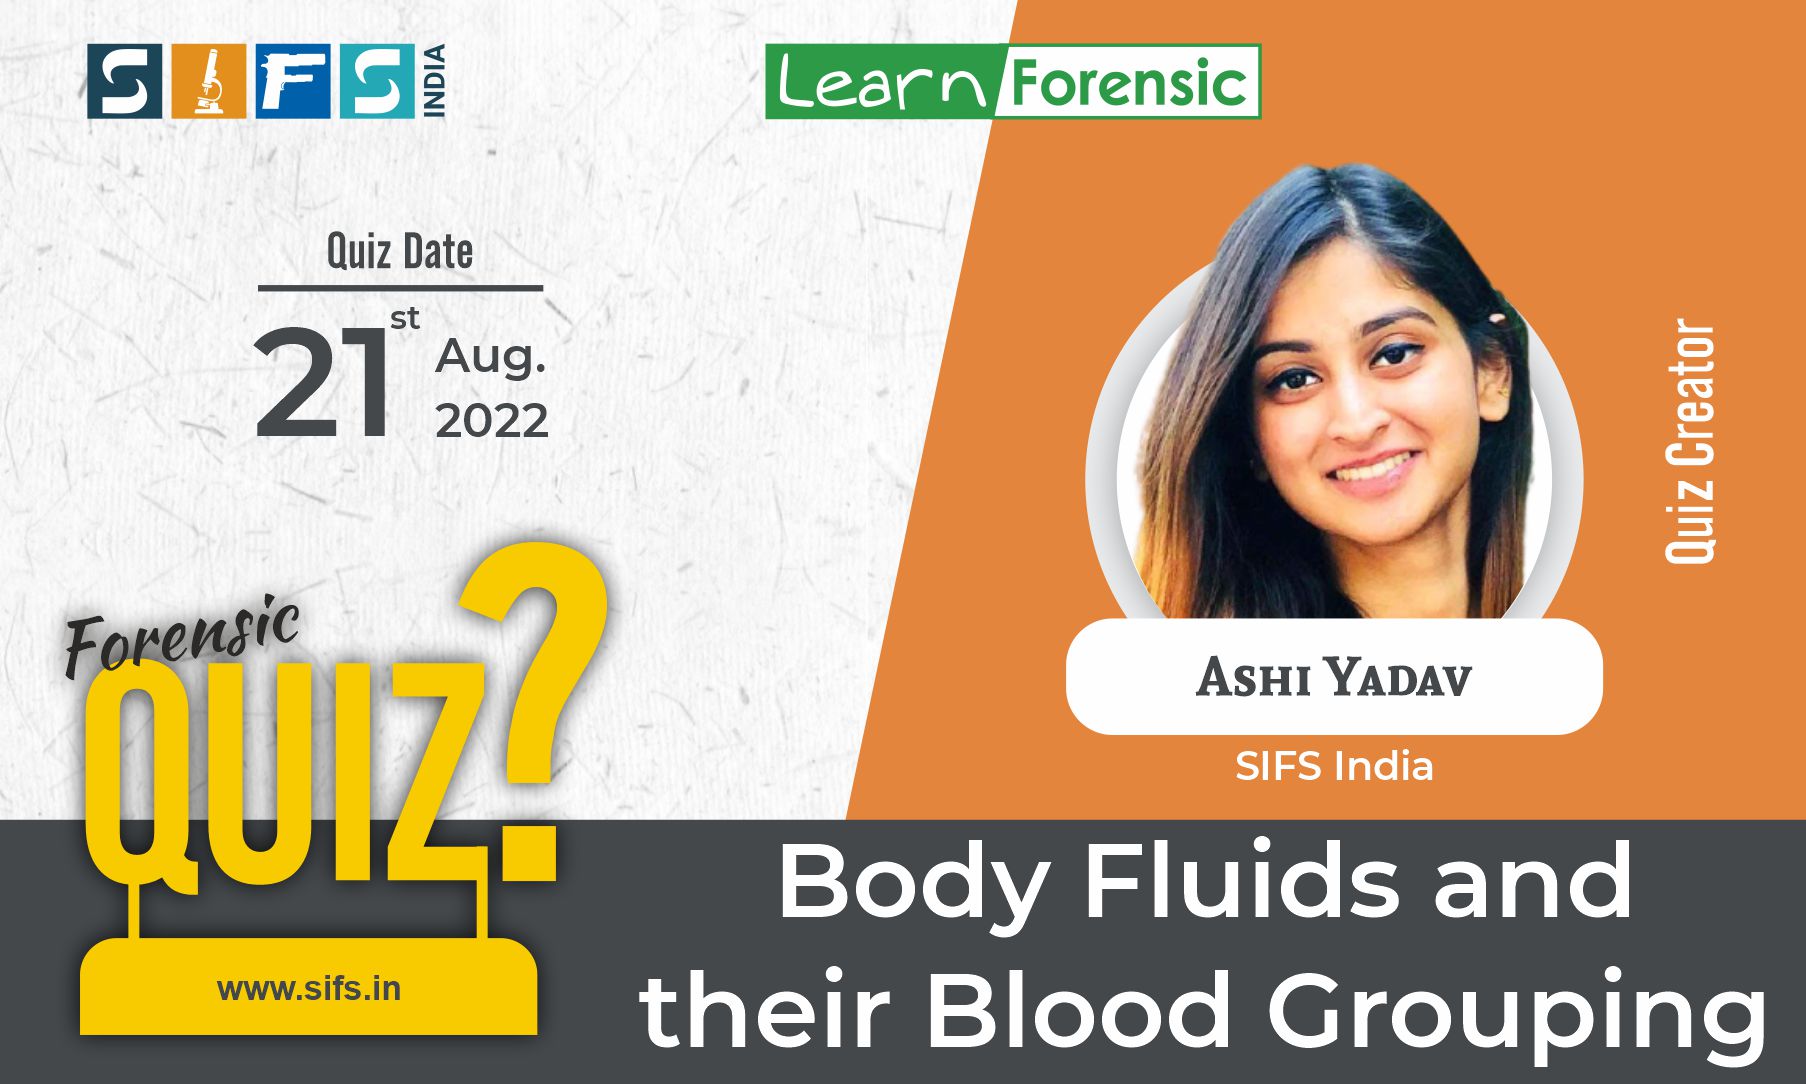 Body Fluids and Blood Grouping